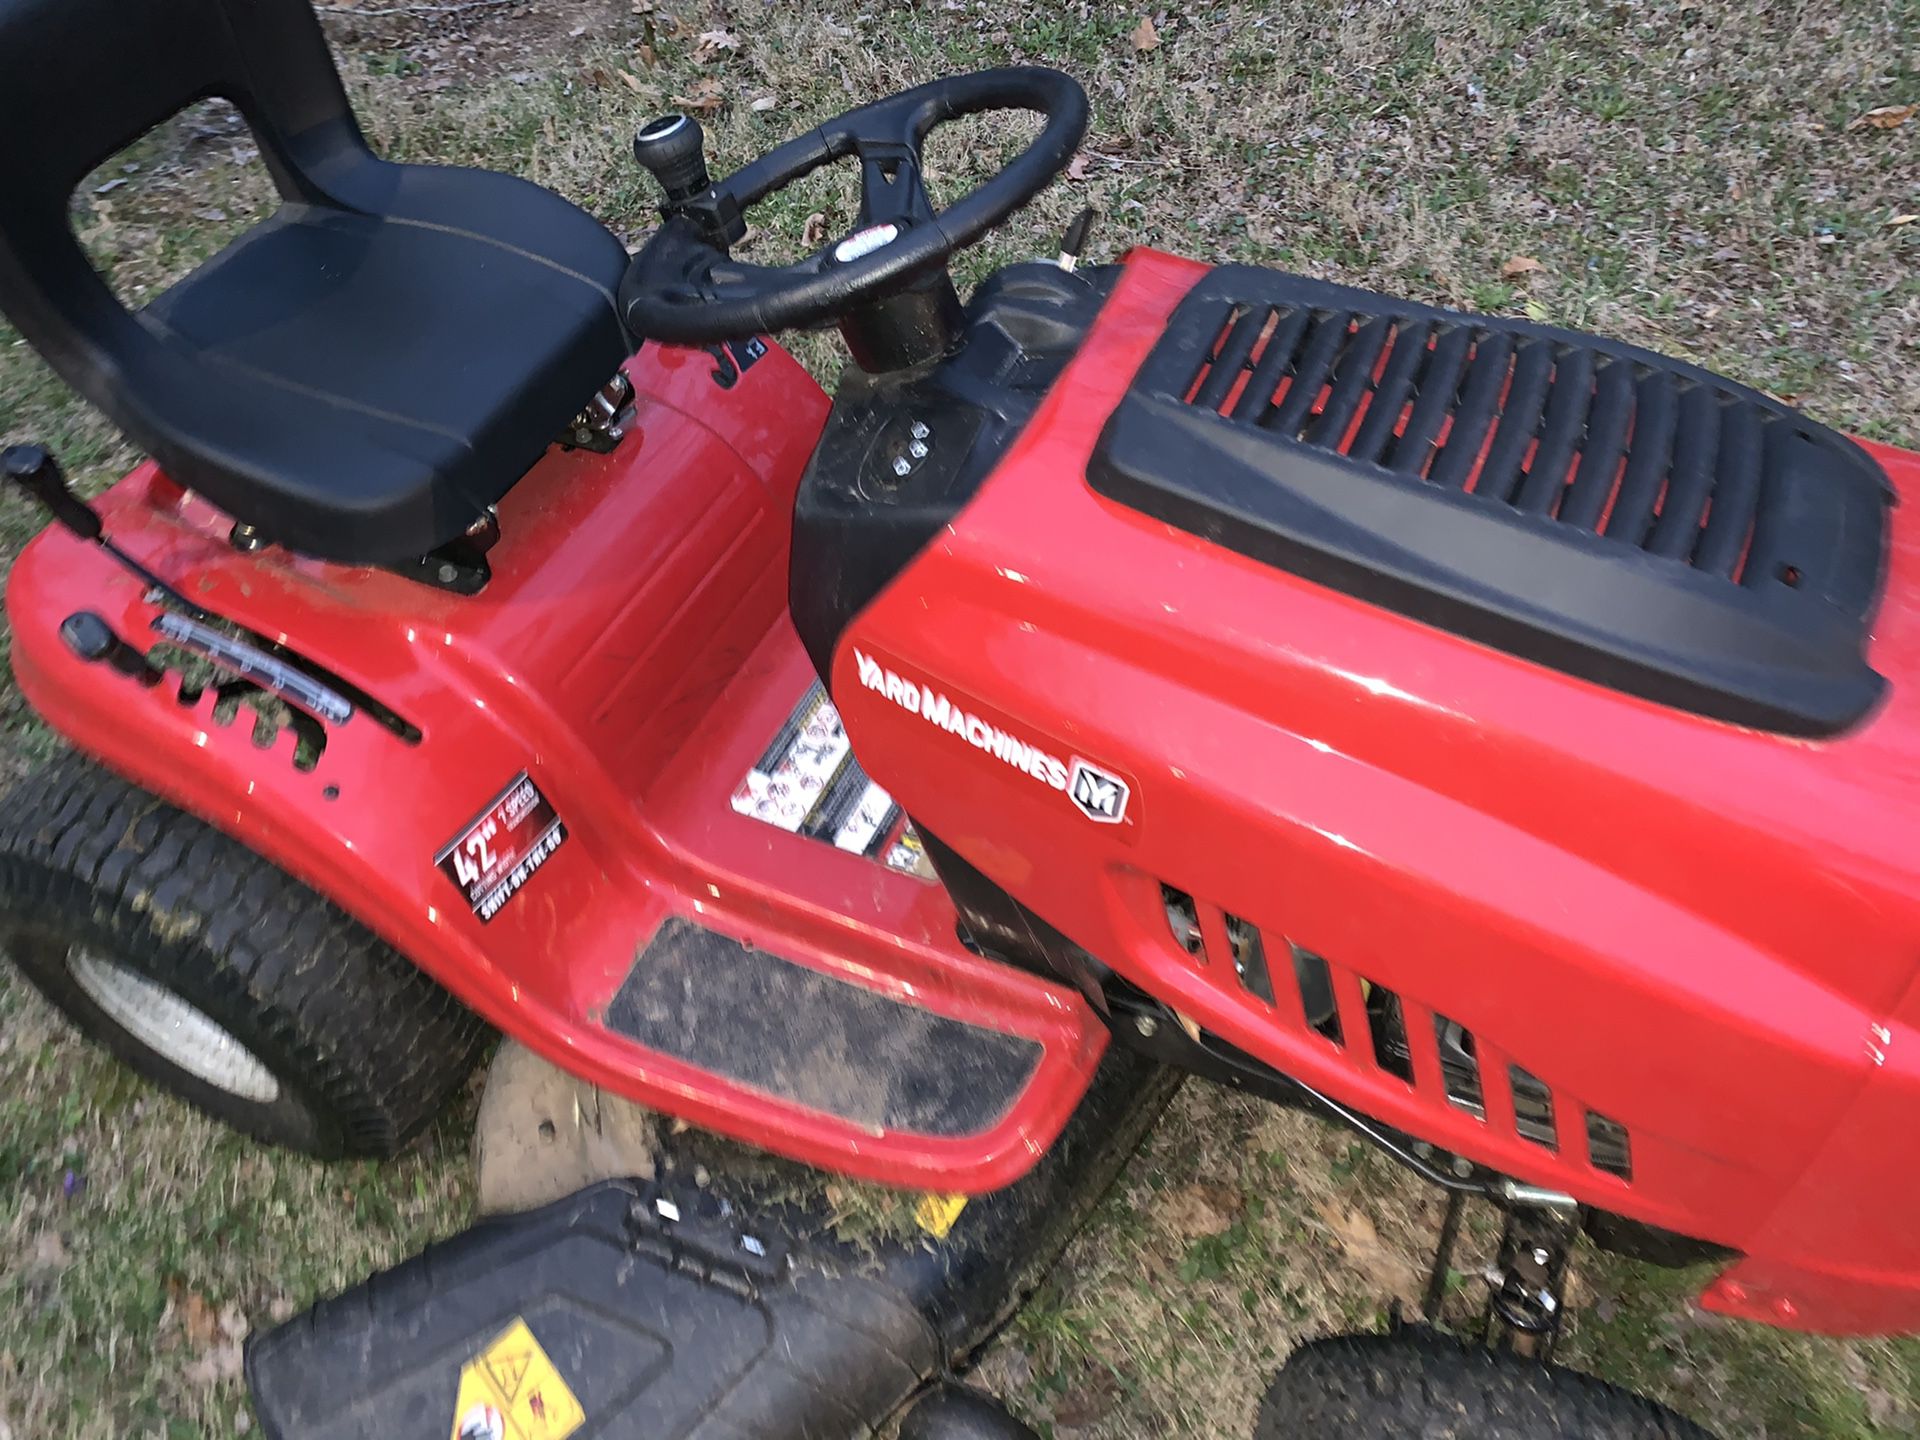 42” Riding Mower For Sale